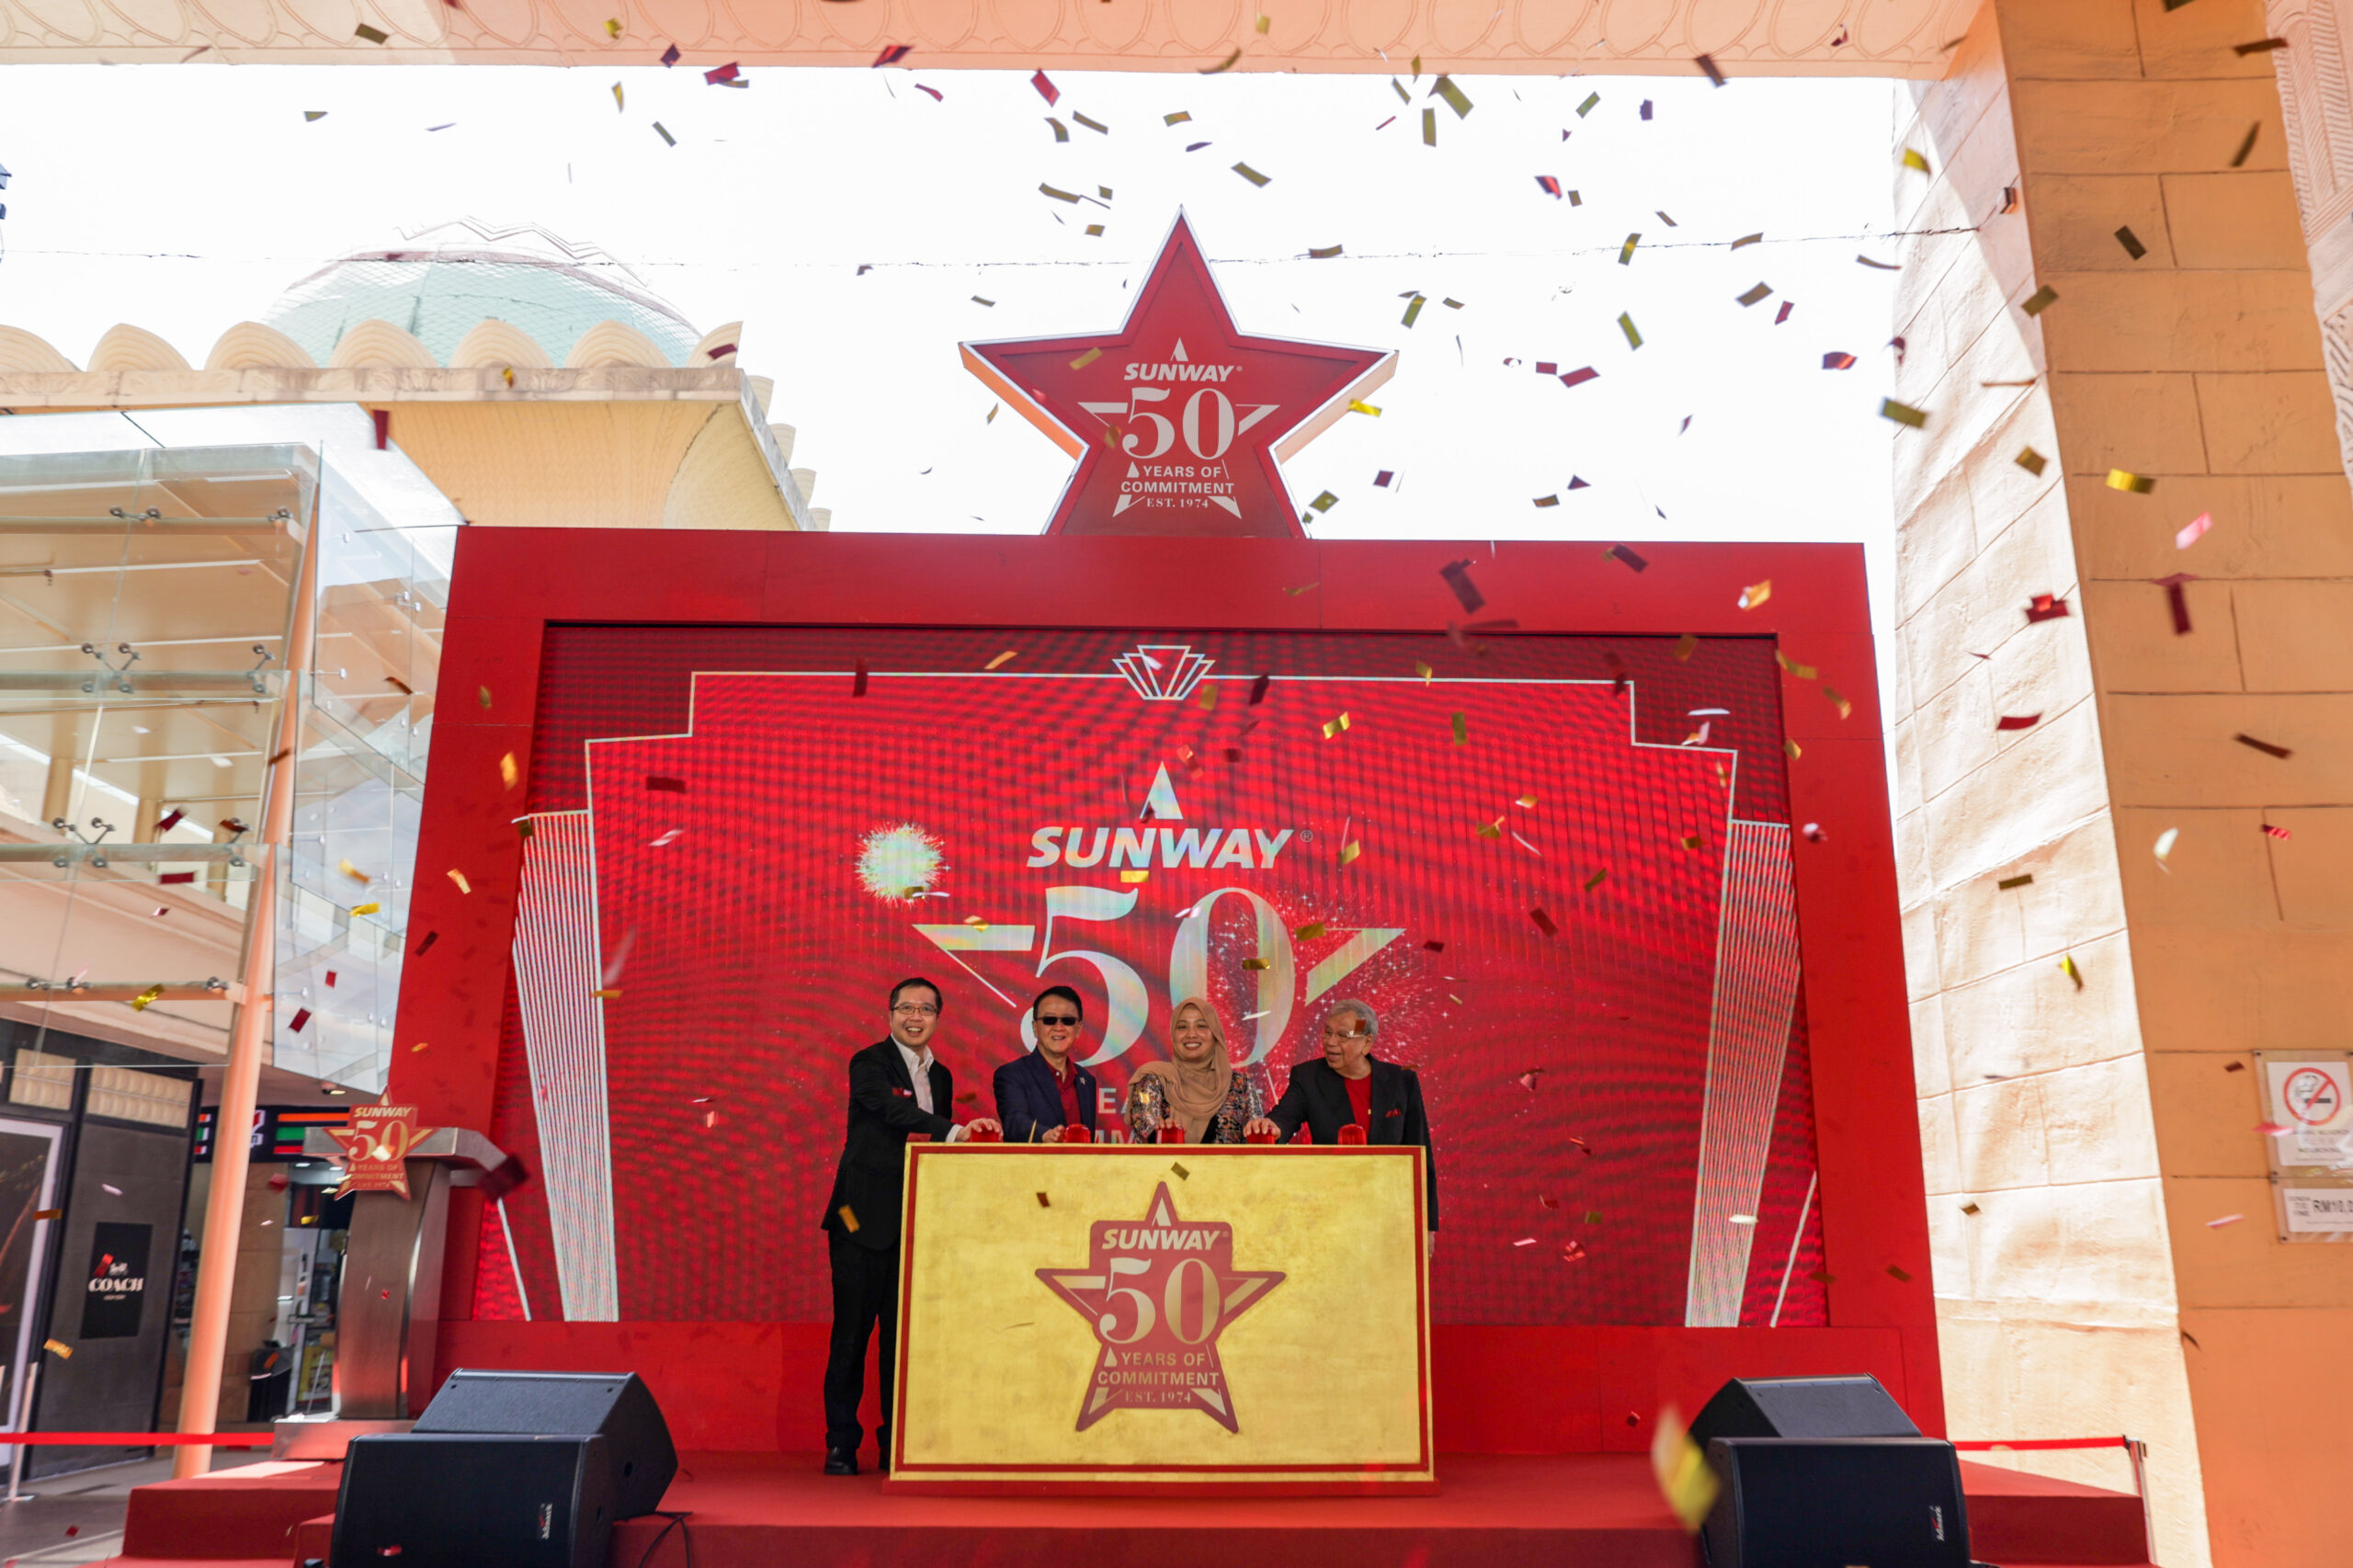 The sunway golden jubilee mega 
roadshow officially kicked off today in sunway city kuala lumpur, in the presence of tourism malaysia deputy director nuwal fadhilah ku azmi and sunway group founder and chairman tan sri dato’ seri sir dr. Jeffrey cheah kbe ao.